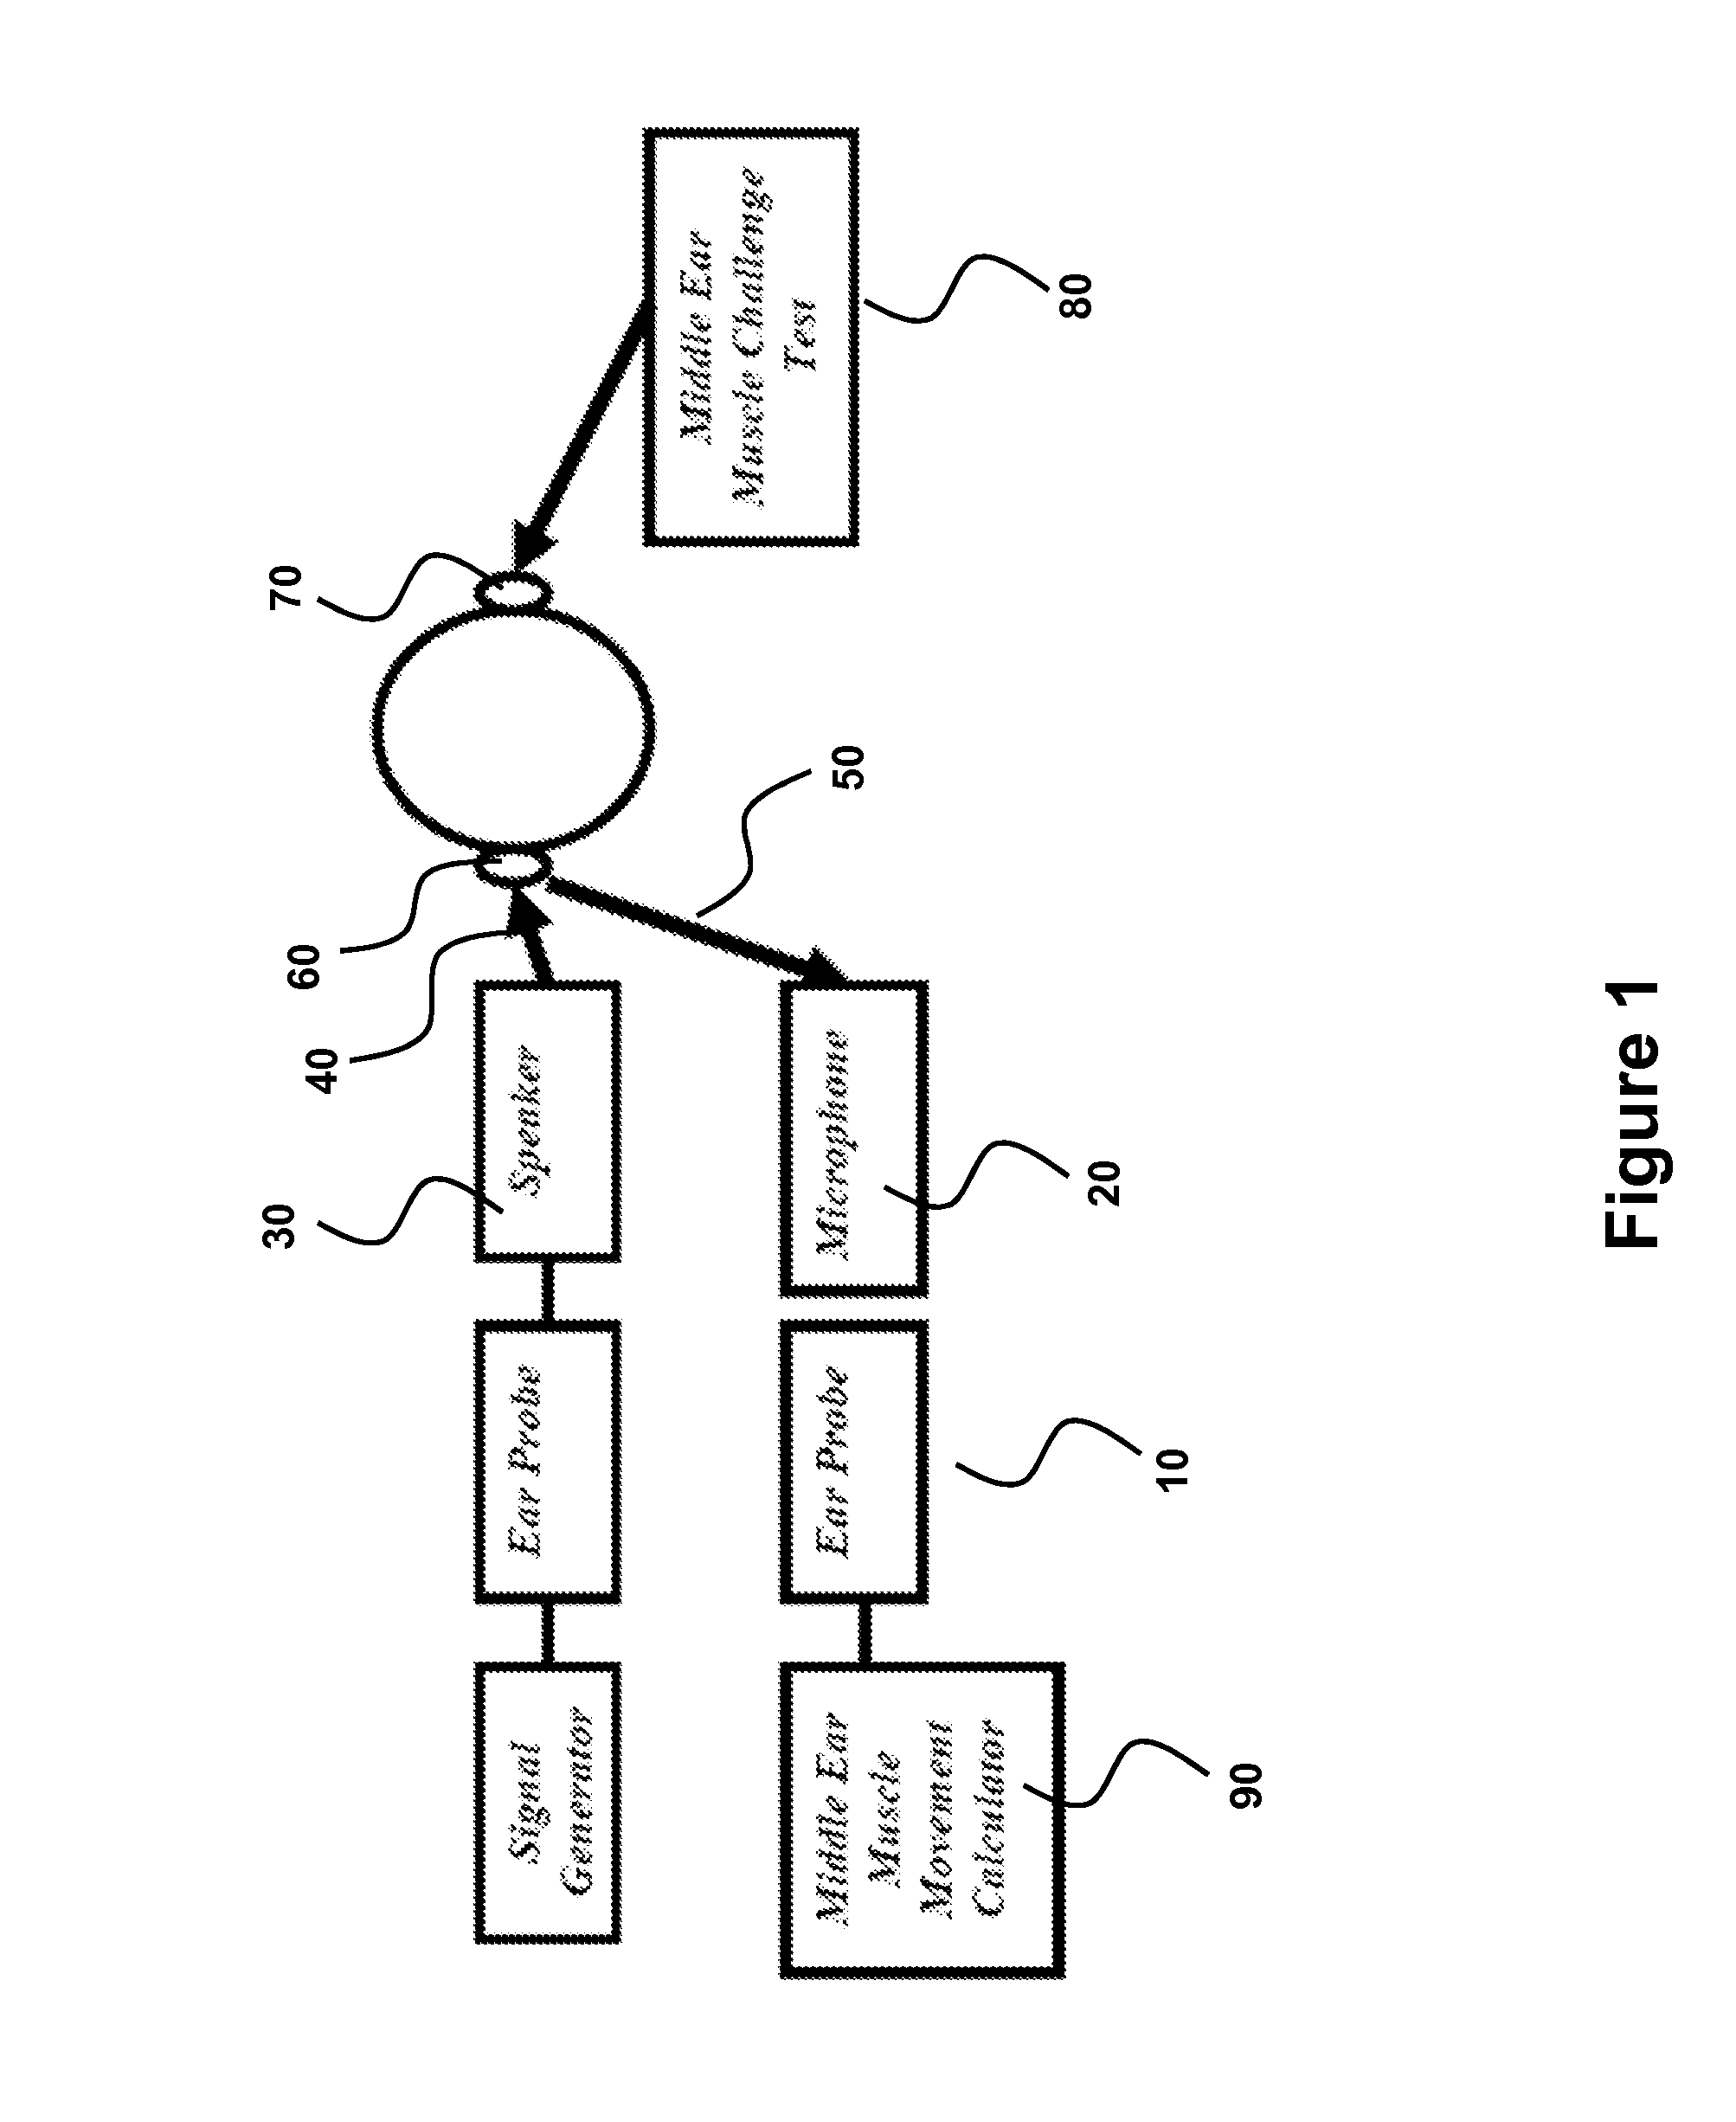 Method and Apparatus for Evaluating Dynamic Middle Ear Muscle Activity